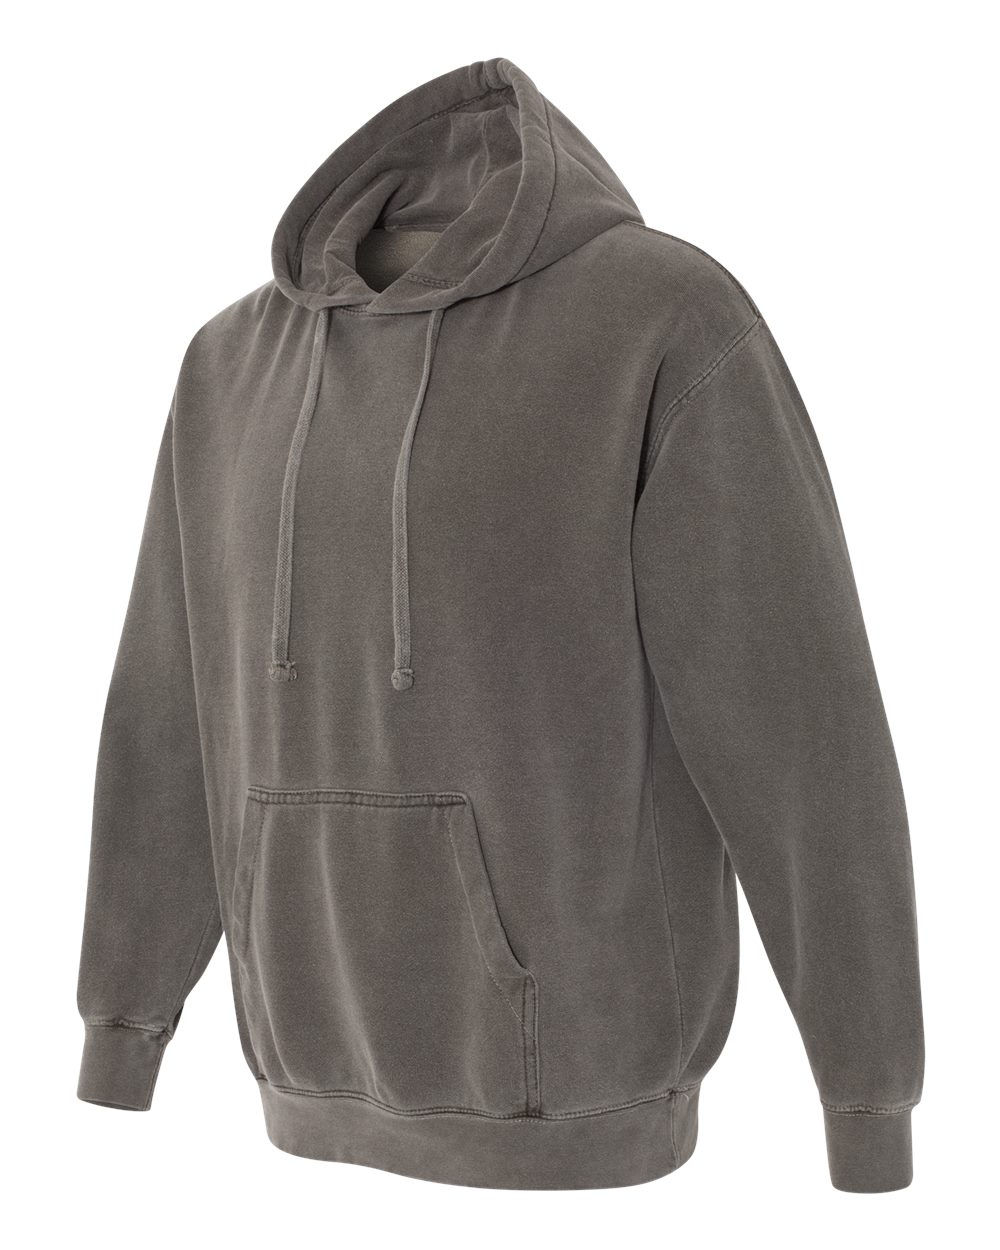 Comfort Colors 1567 - Garment Dyed Hooded Pullover Sweatshirt $23.94 ...